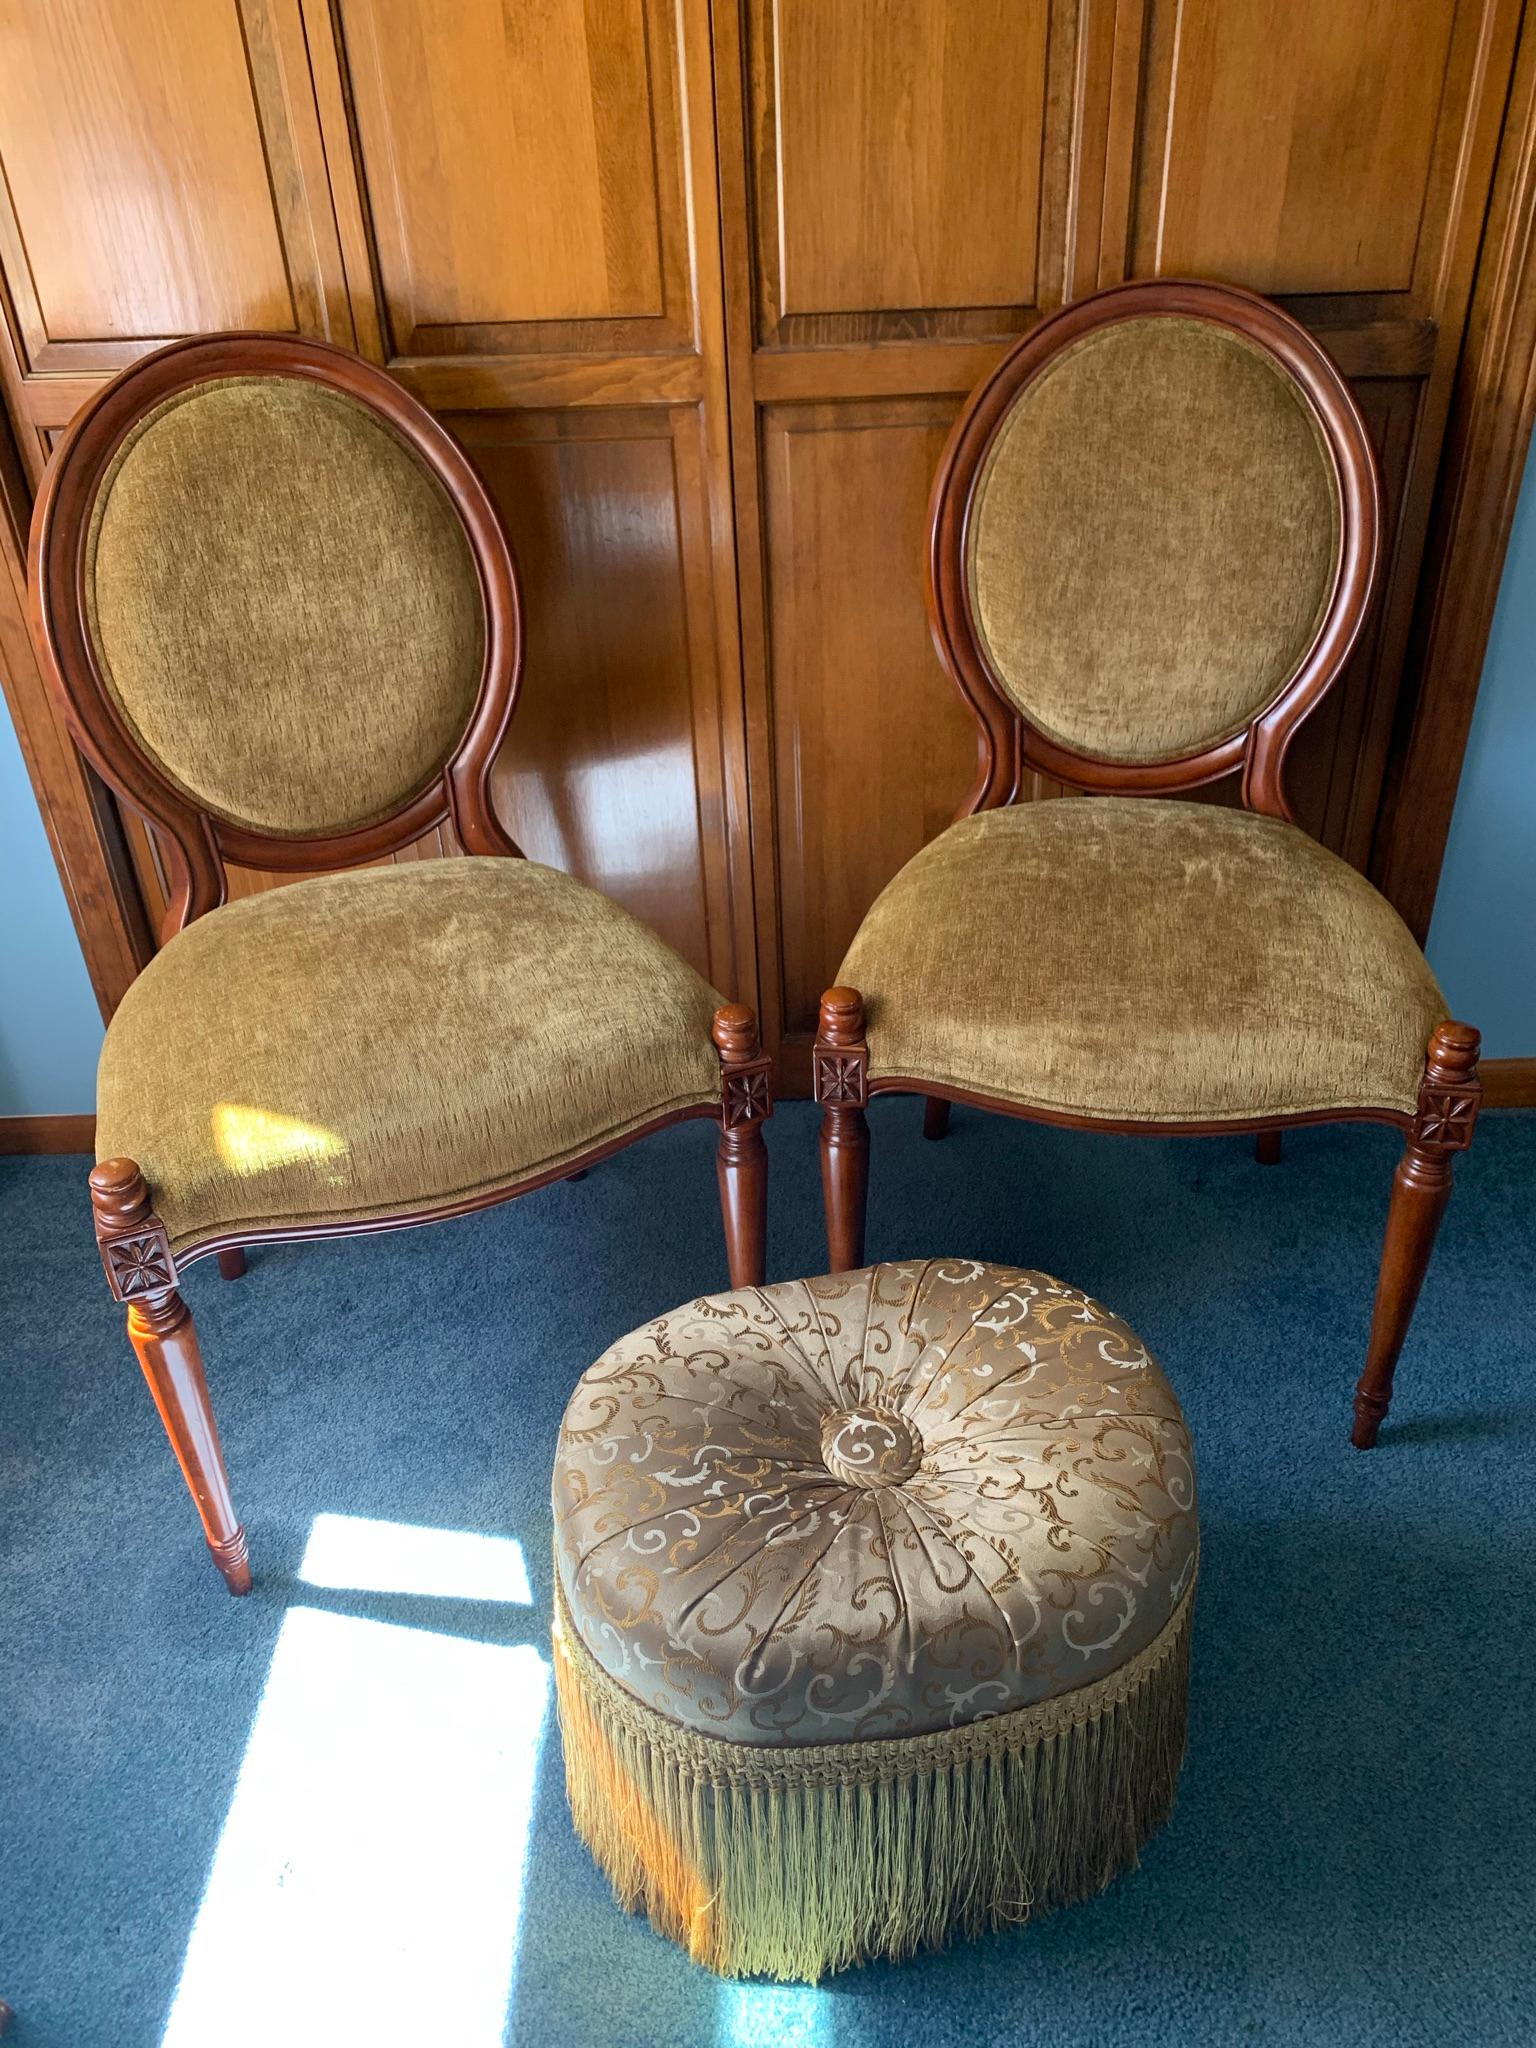 Two Bombay Company Chairs and Ottoman